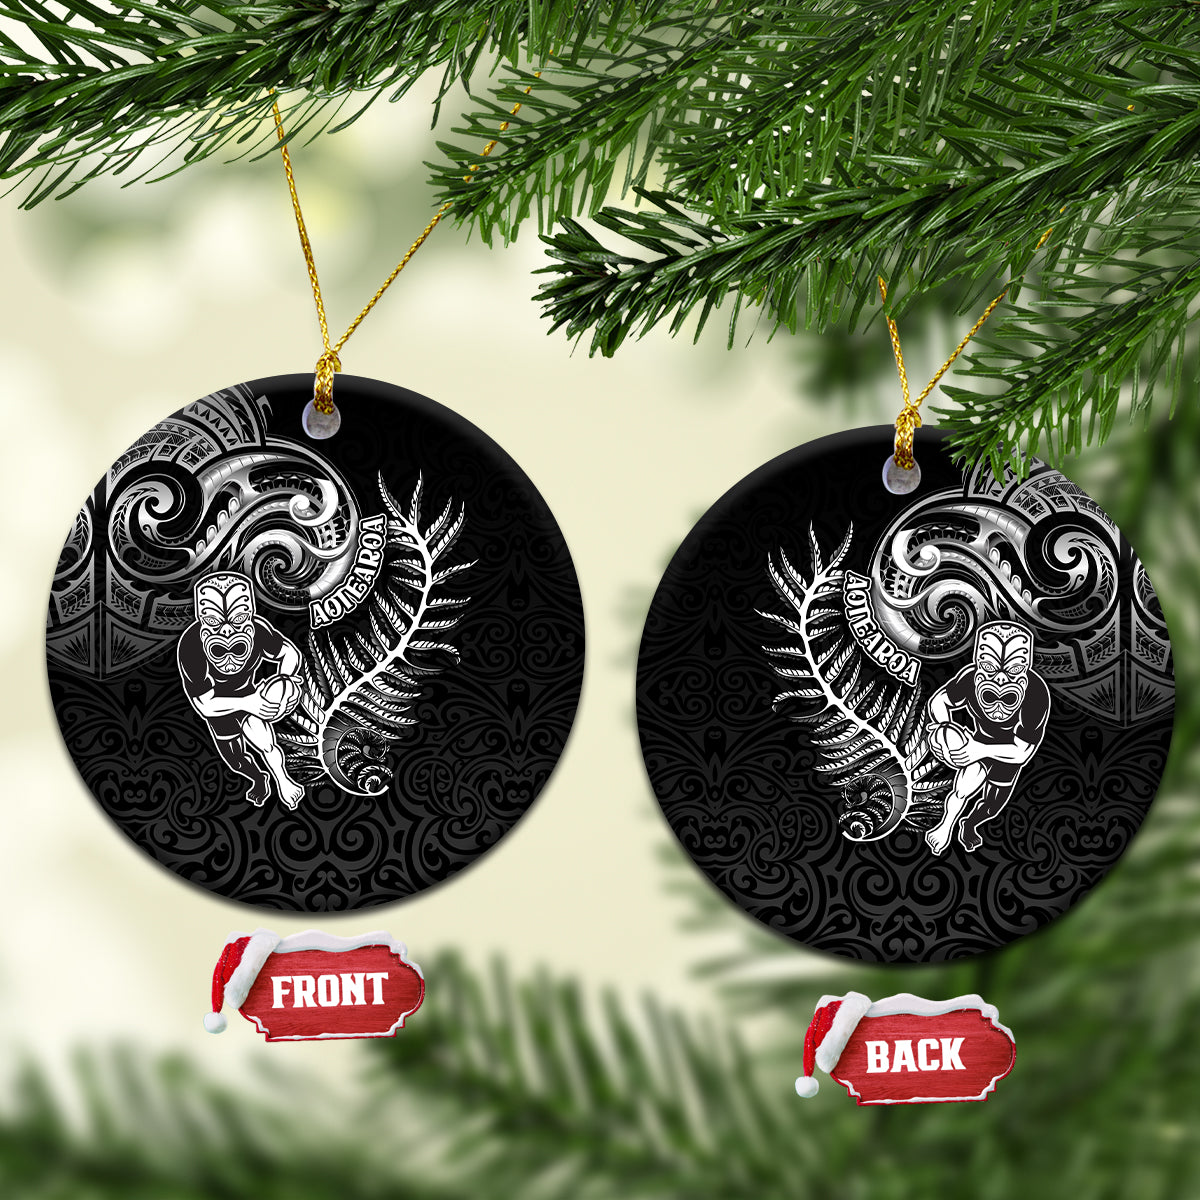 New Zealand Rugby Ceramic Ornament Maori Warrior Rugby with Silver Fern Sleeve Tribal Ethnic Style LT03 Circle Black - Polynesian Pride